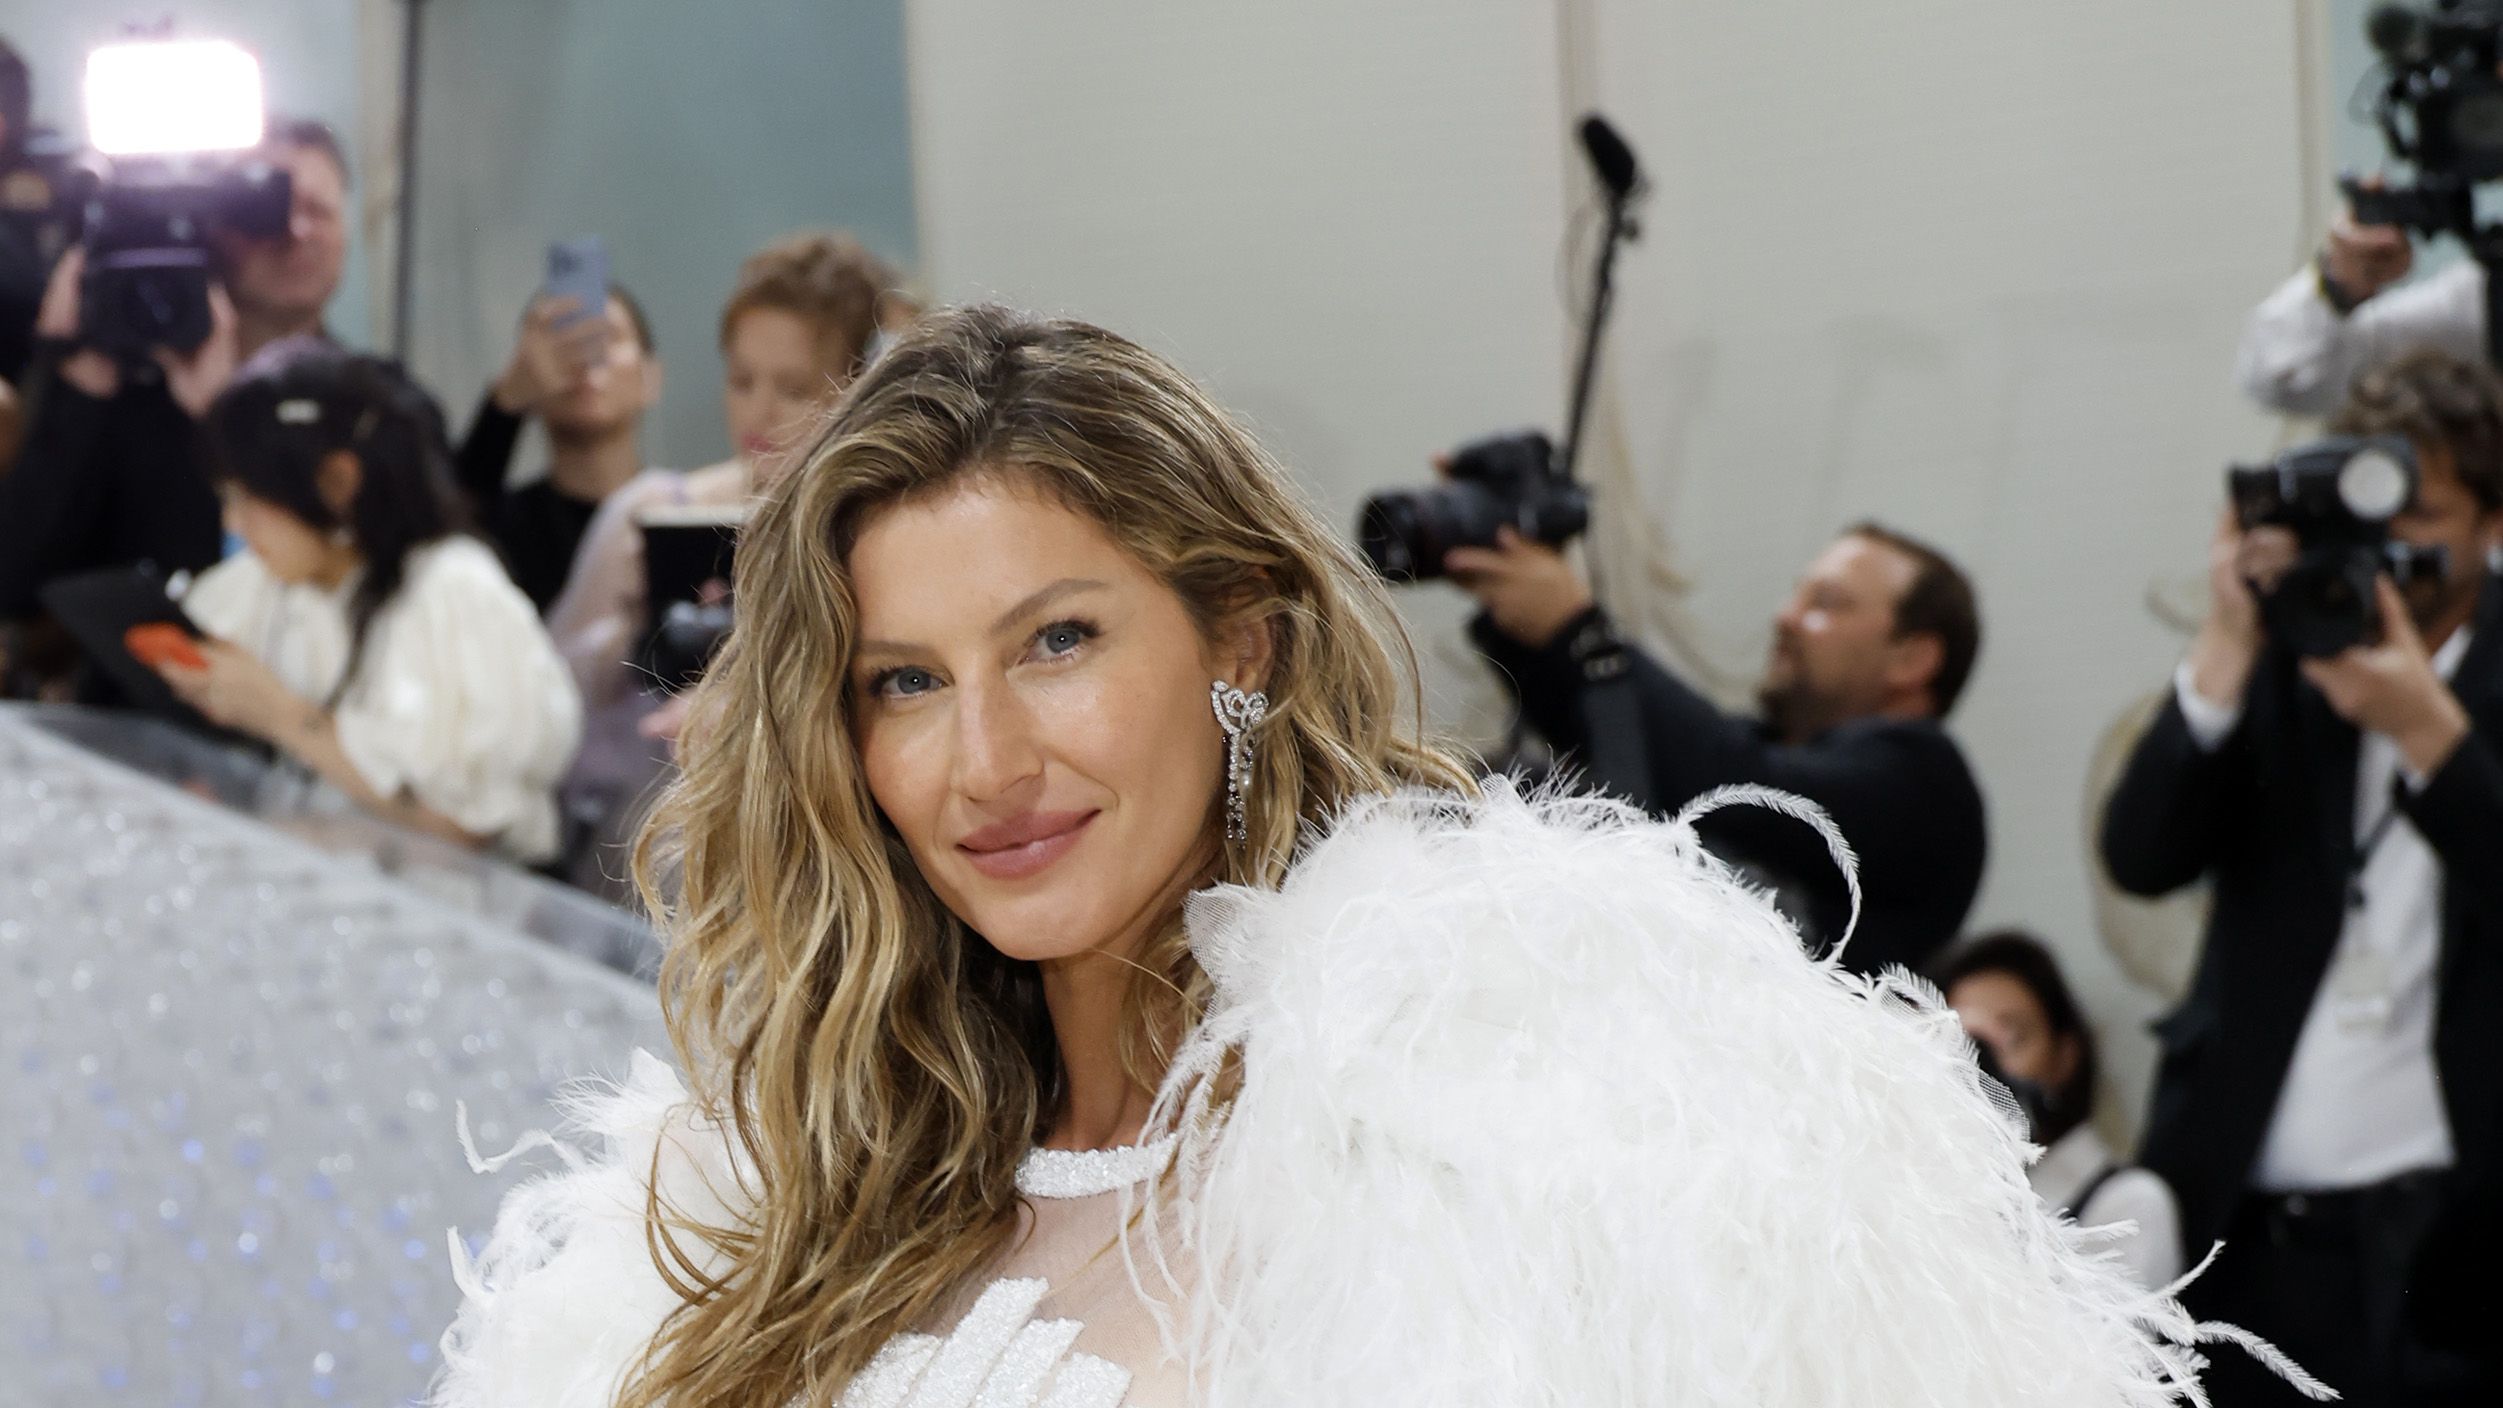 Gisele Bündchen Wore an Extremely Long Feathered Cape to the 2023